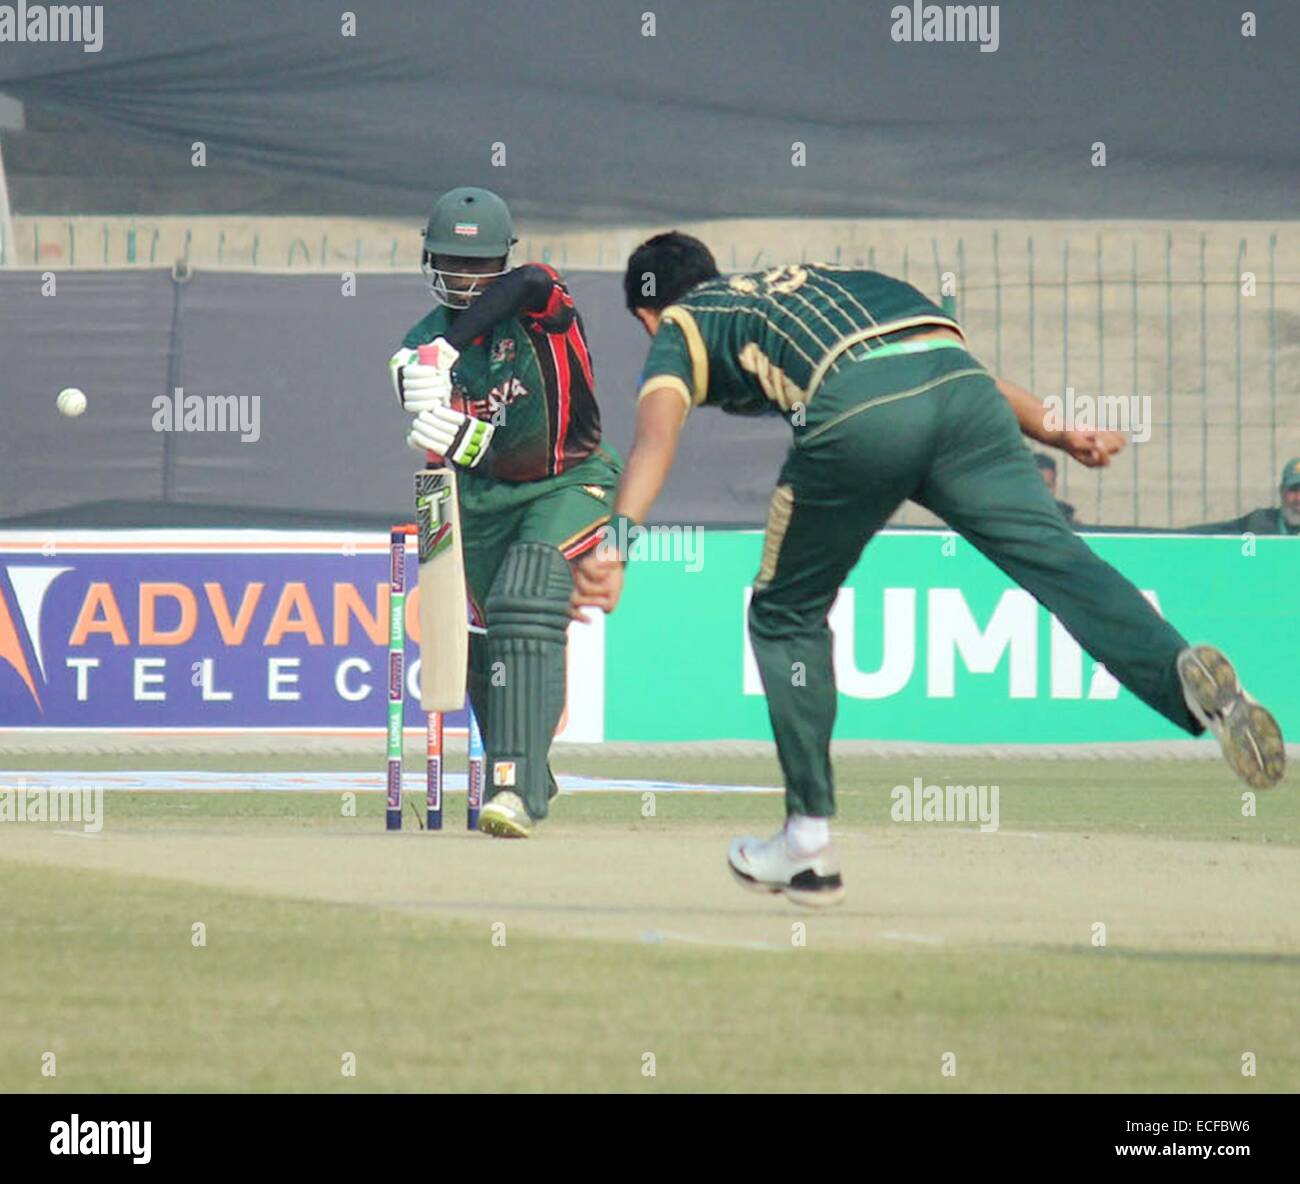 (141213) -- LAHORE, Dec. 13, 2014 (Xinhua) -- Kenyan player Nelson Odhiambo (L) plays a shot during the first One Day International (ODI) match between Pakistan-A and Kenya at the Gaddafi Cricket stadium in eastern Pakistan's Lahore, Dec. 13, 2014. Pakistan won by 9 wickets. (Xinhua/Sajjad) Stock Photo